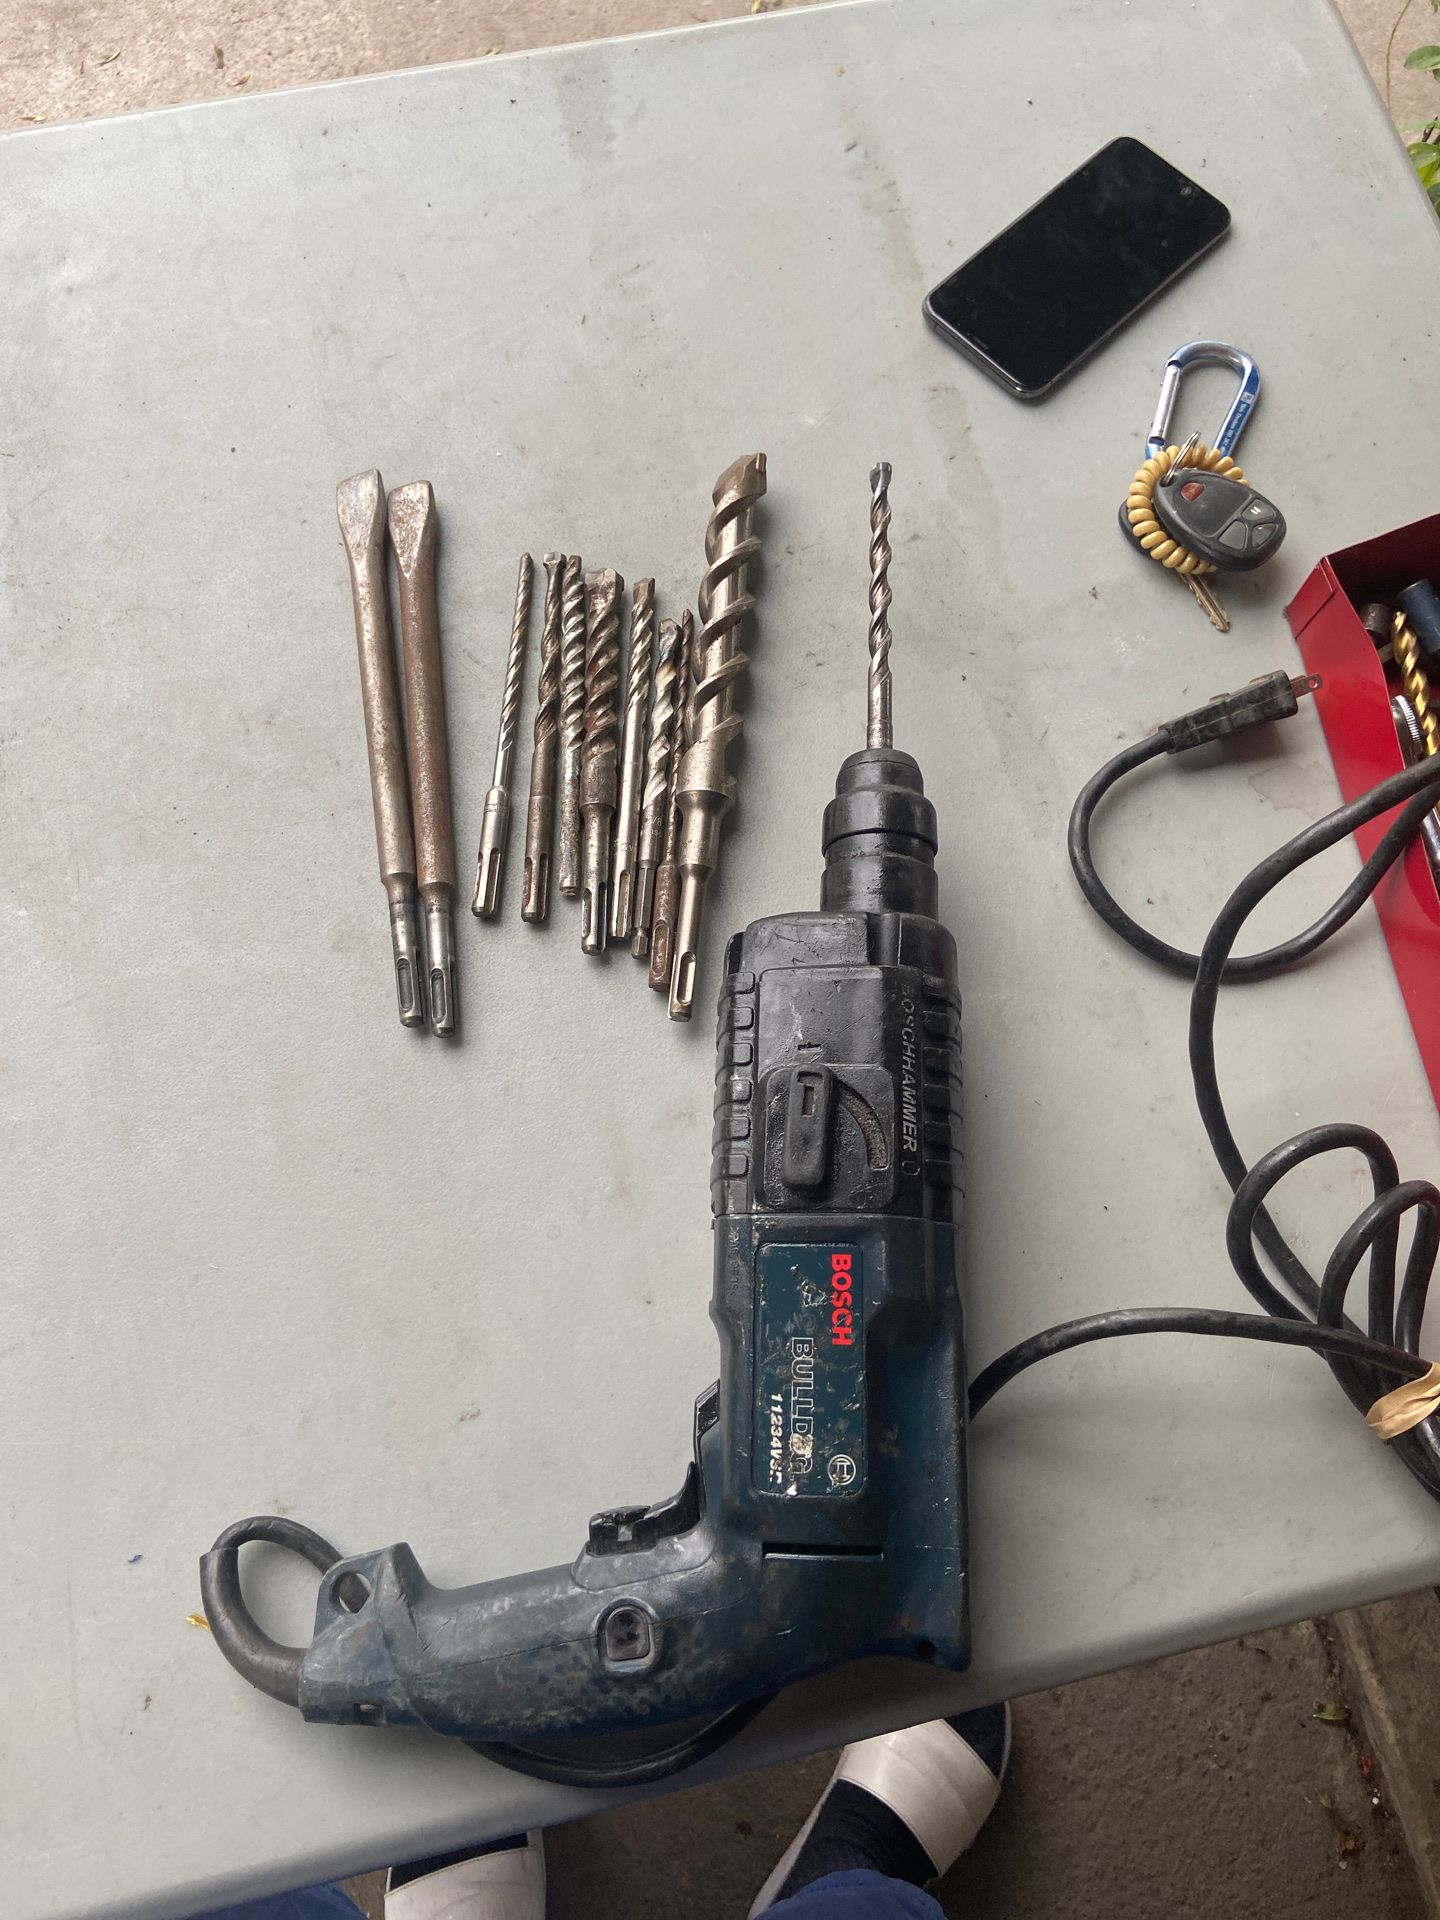 Bosch with drill bits